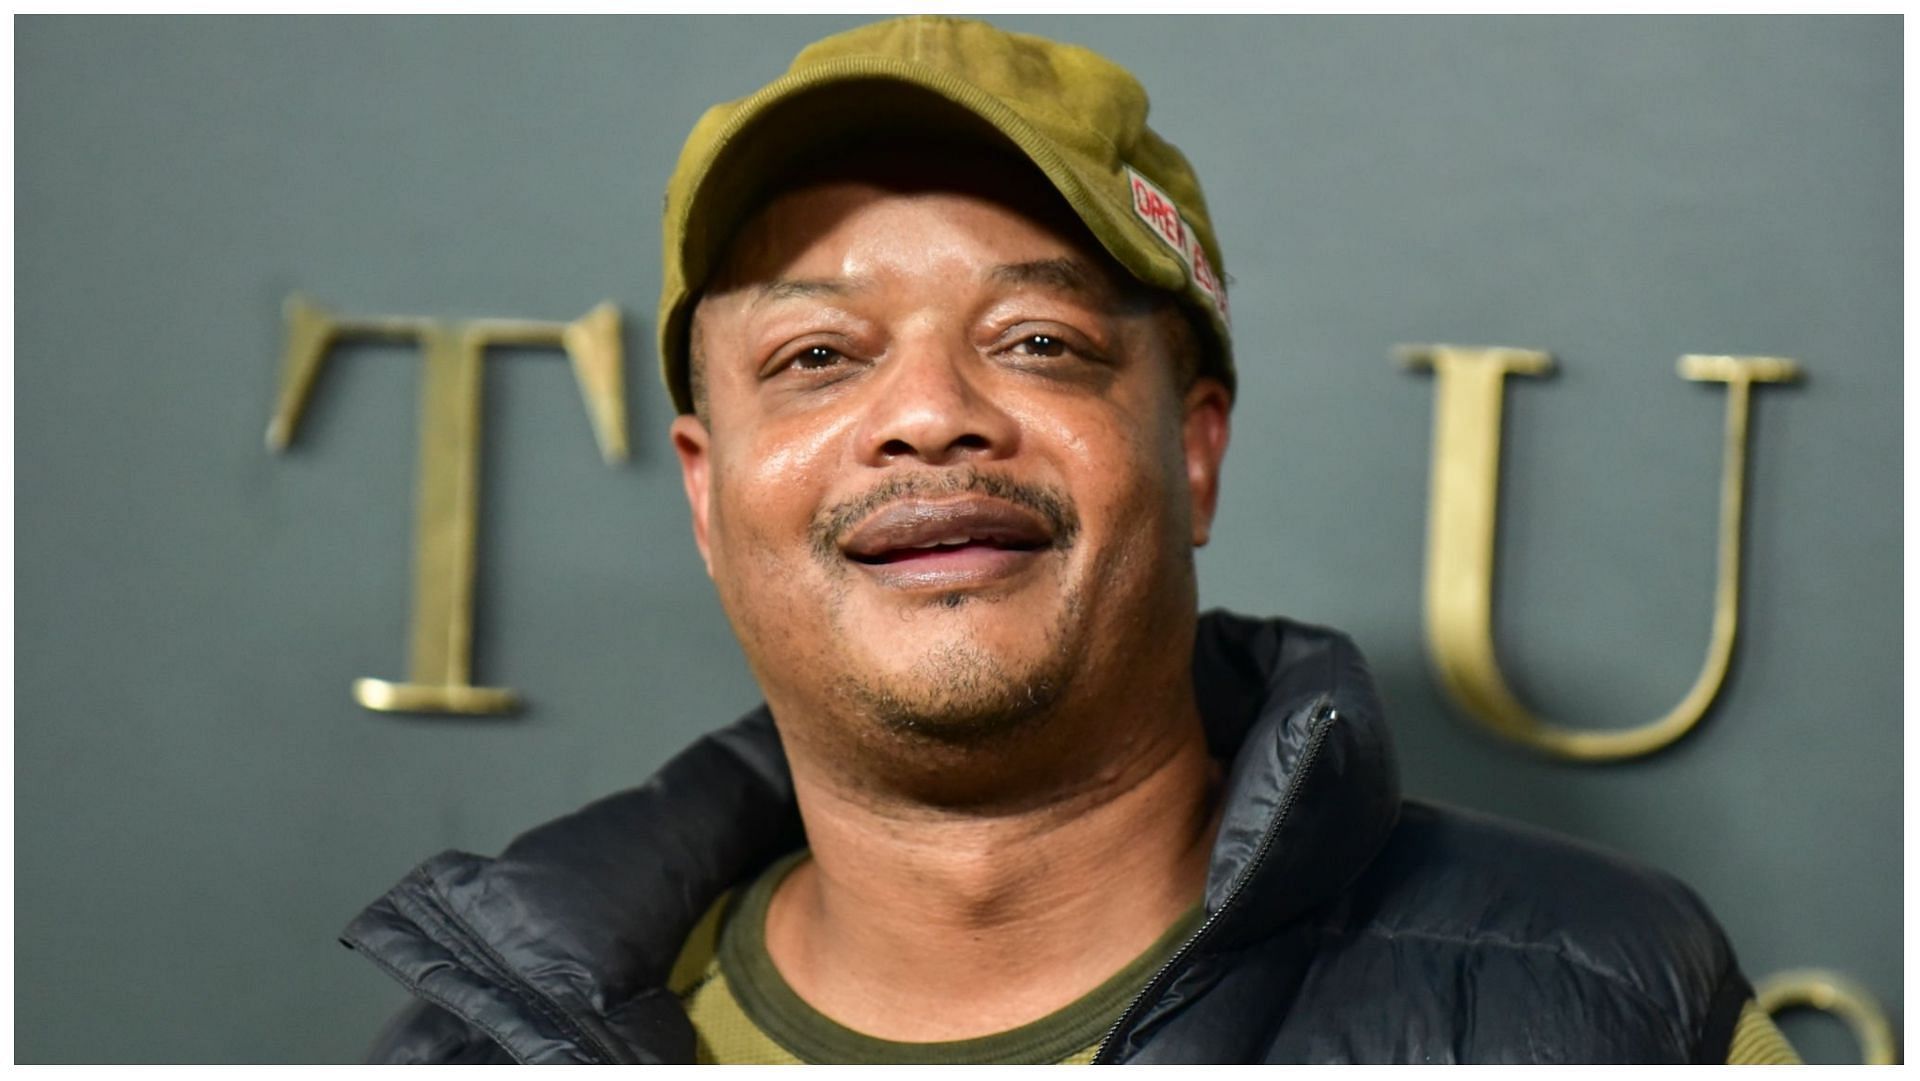 Todd Bridges has married for the second time (Image via Rodin Eckenroth/Getty Images)